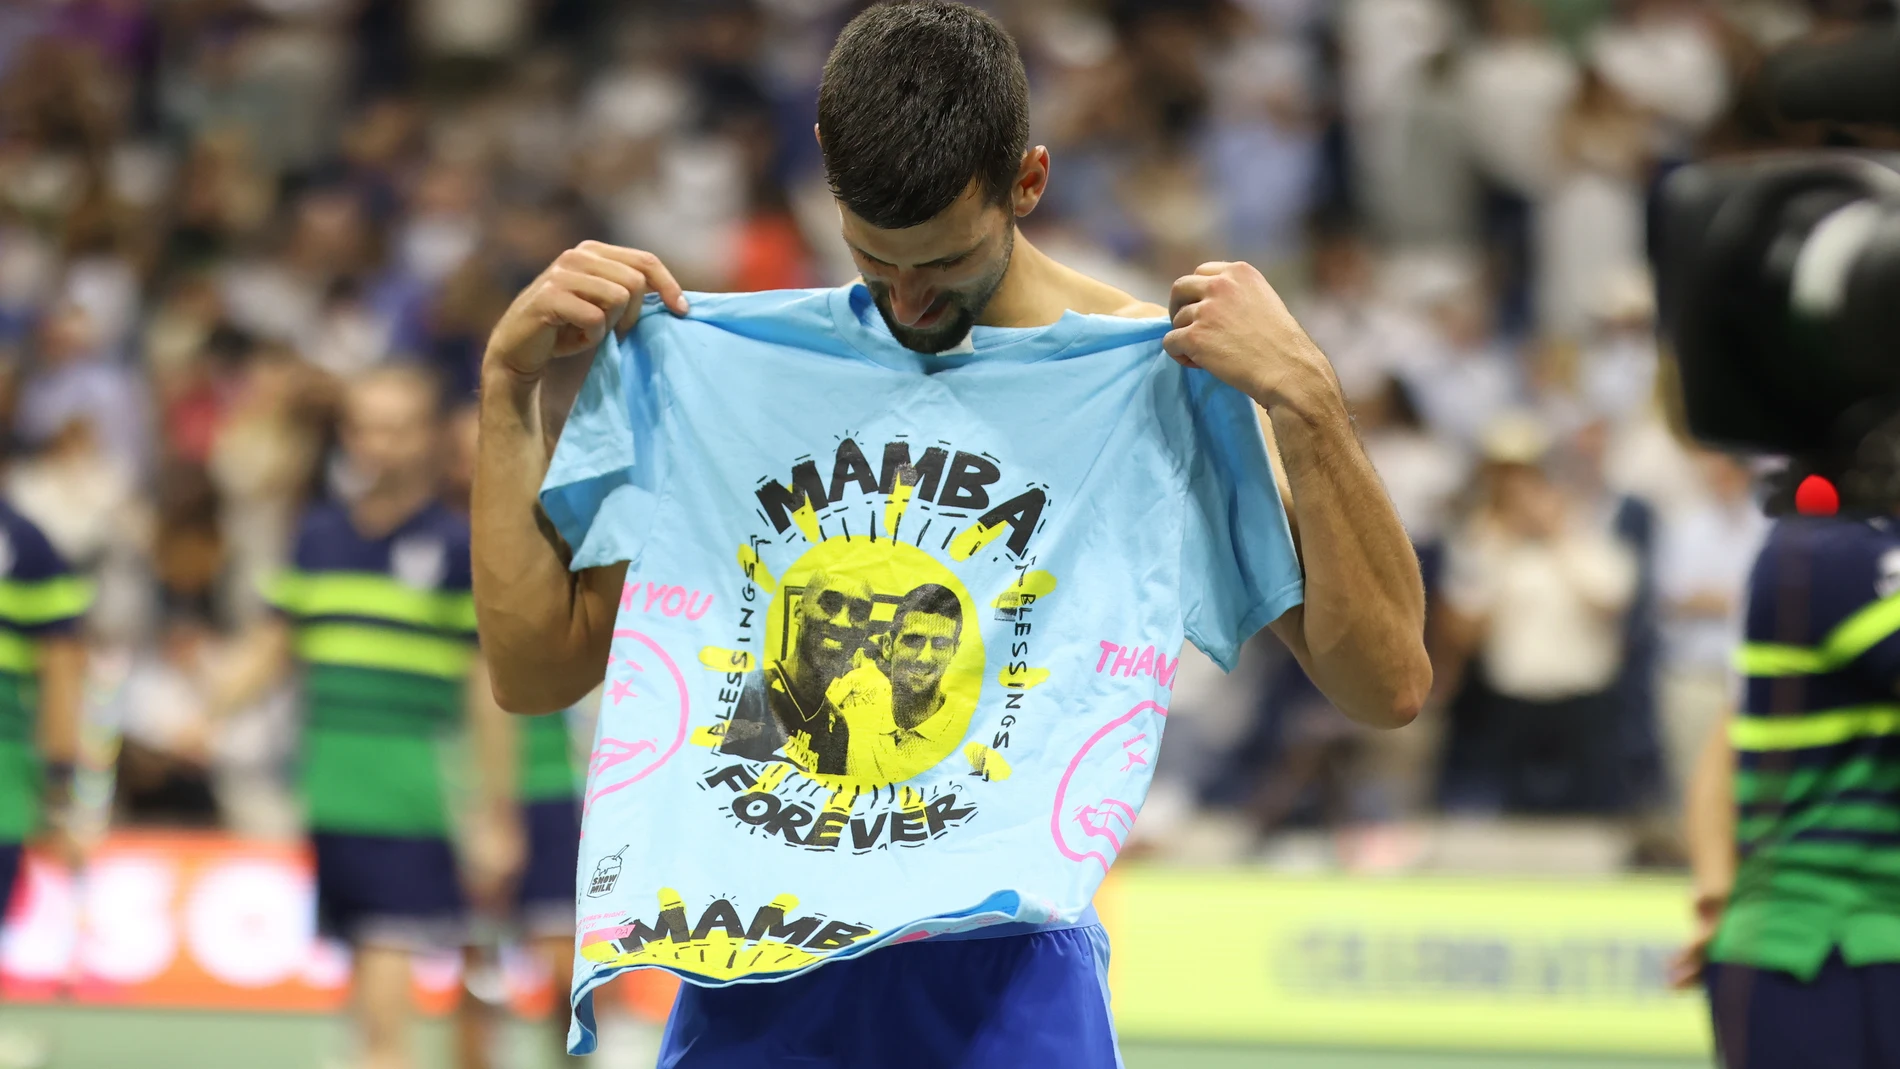 Flushing Meadows (United States), 11/09/2023.- Novak Djokovic of Serbia receives a t-shirt reading 'Mamba Forever' and displaying a picture of him and late basketball player Kobe Bryant after he won against Daniil Medvedev of Russia in their Men's Final match at the US Open Tennis Championships at the Flushing Meadows, New York, USA, 10 September 2023. The US Open runs from 28 August through 10 September. (Tenis, Baloncesto, Rusia, Nueva York) EFE/EPA/SARAH YENESEL 